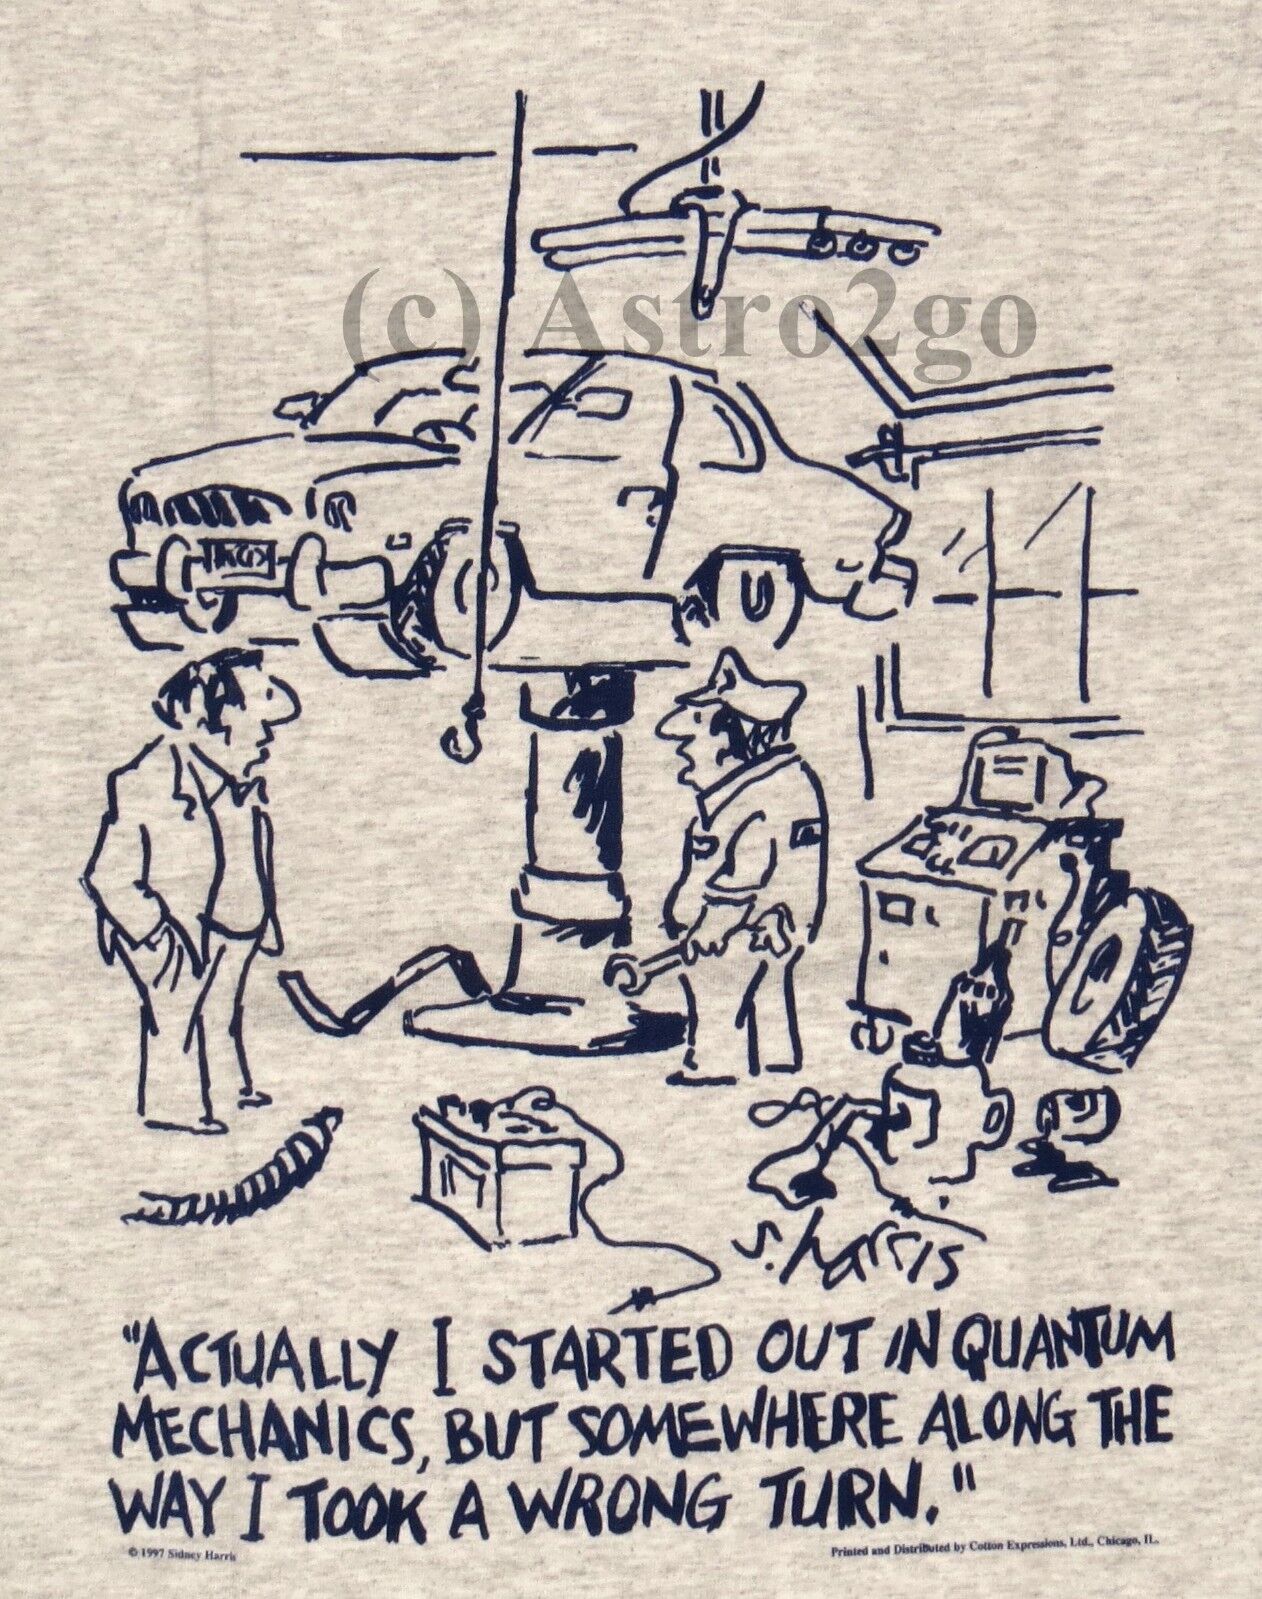 Alstyle or Cotton Expressions Sidney Harris-QUANTUM MECHANIC--Science Physics  Cartoon T shirt NEW! Size